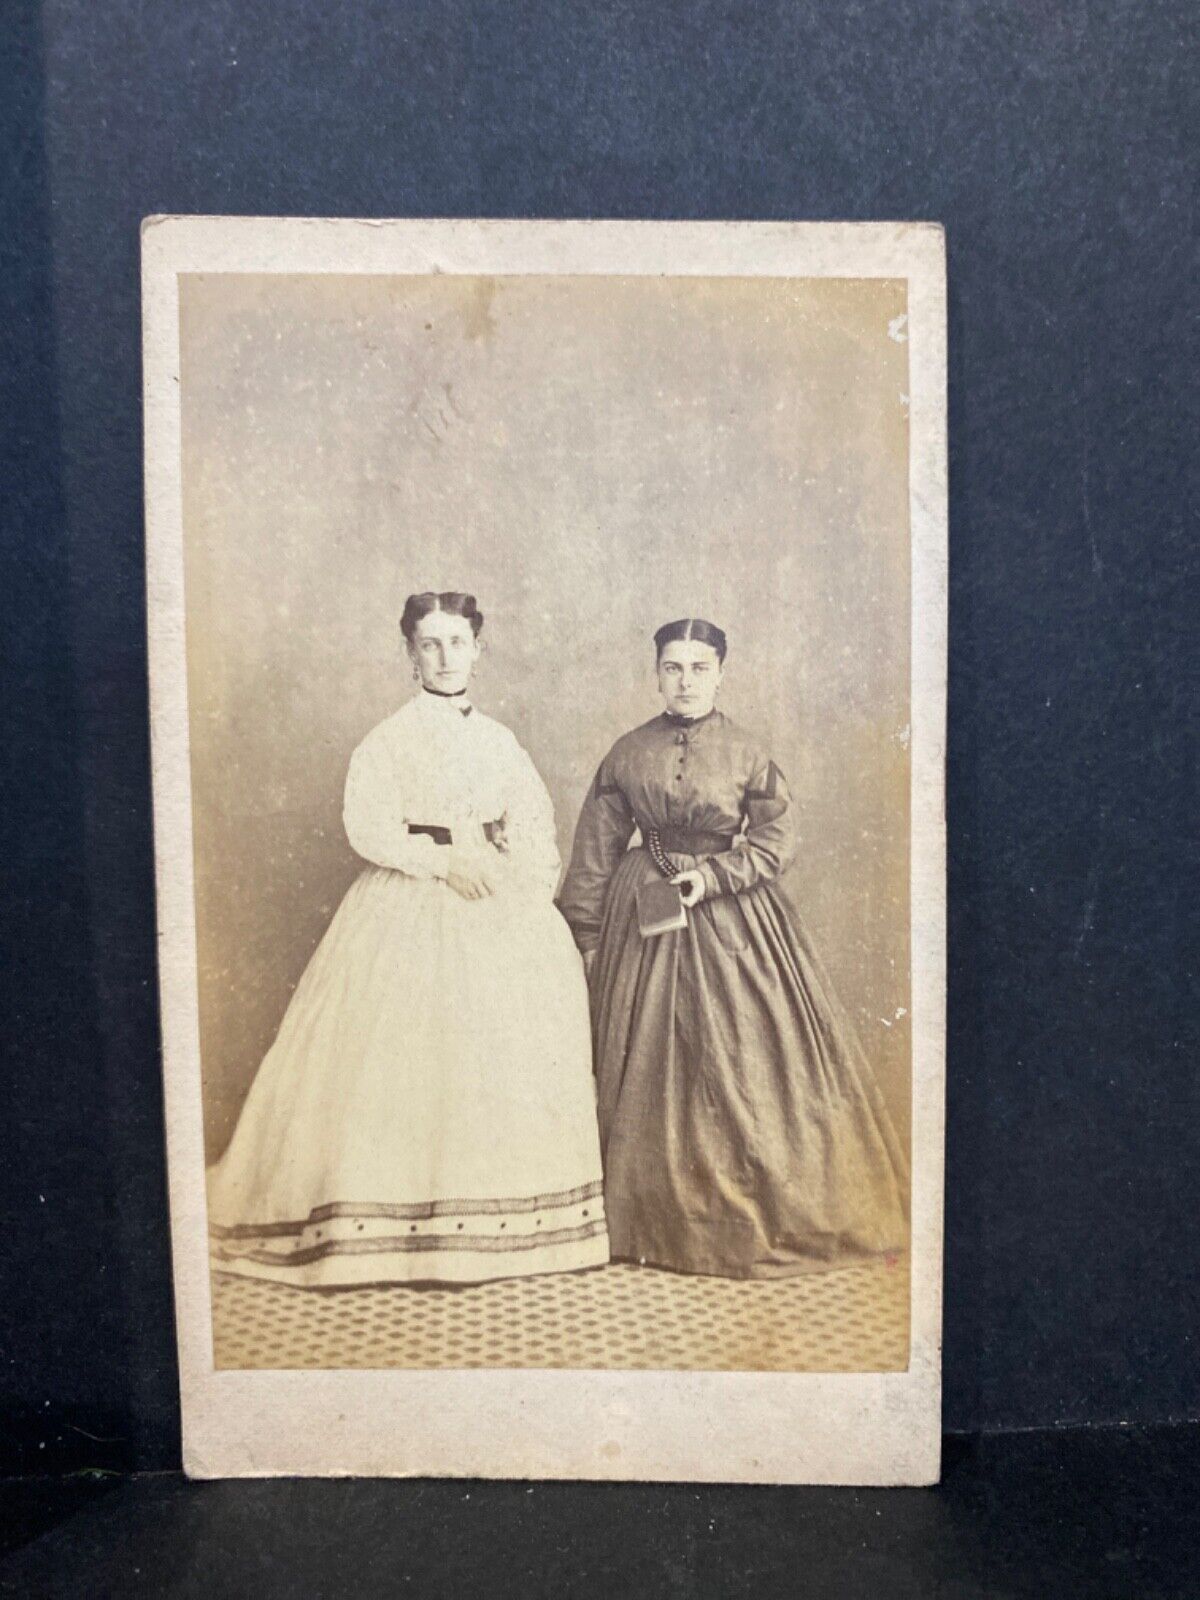 Early antique cdv photo 2 young women by Hanks of Malmesbury Wiltshire 